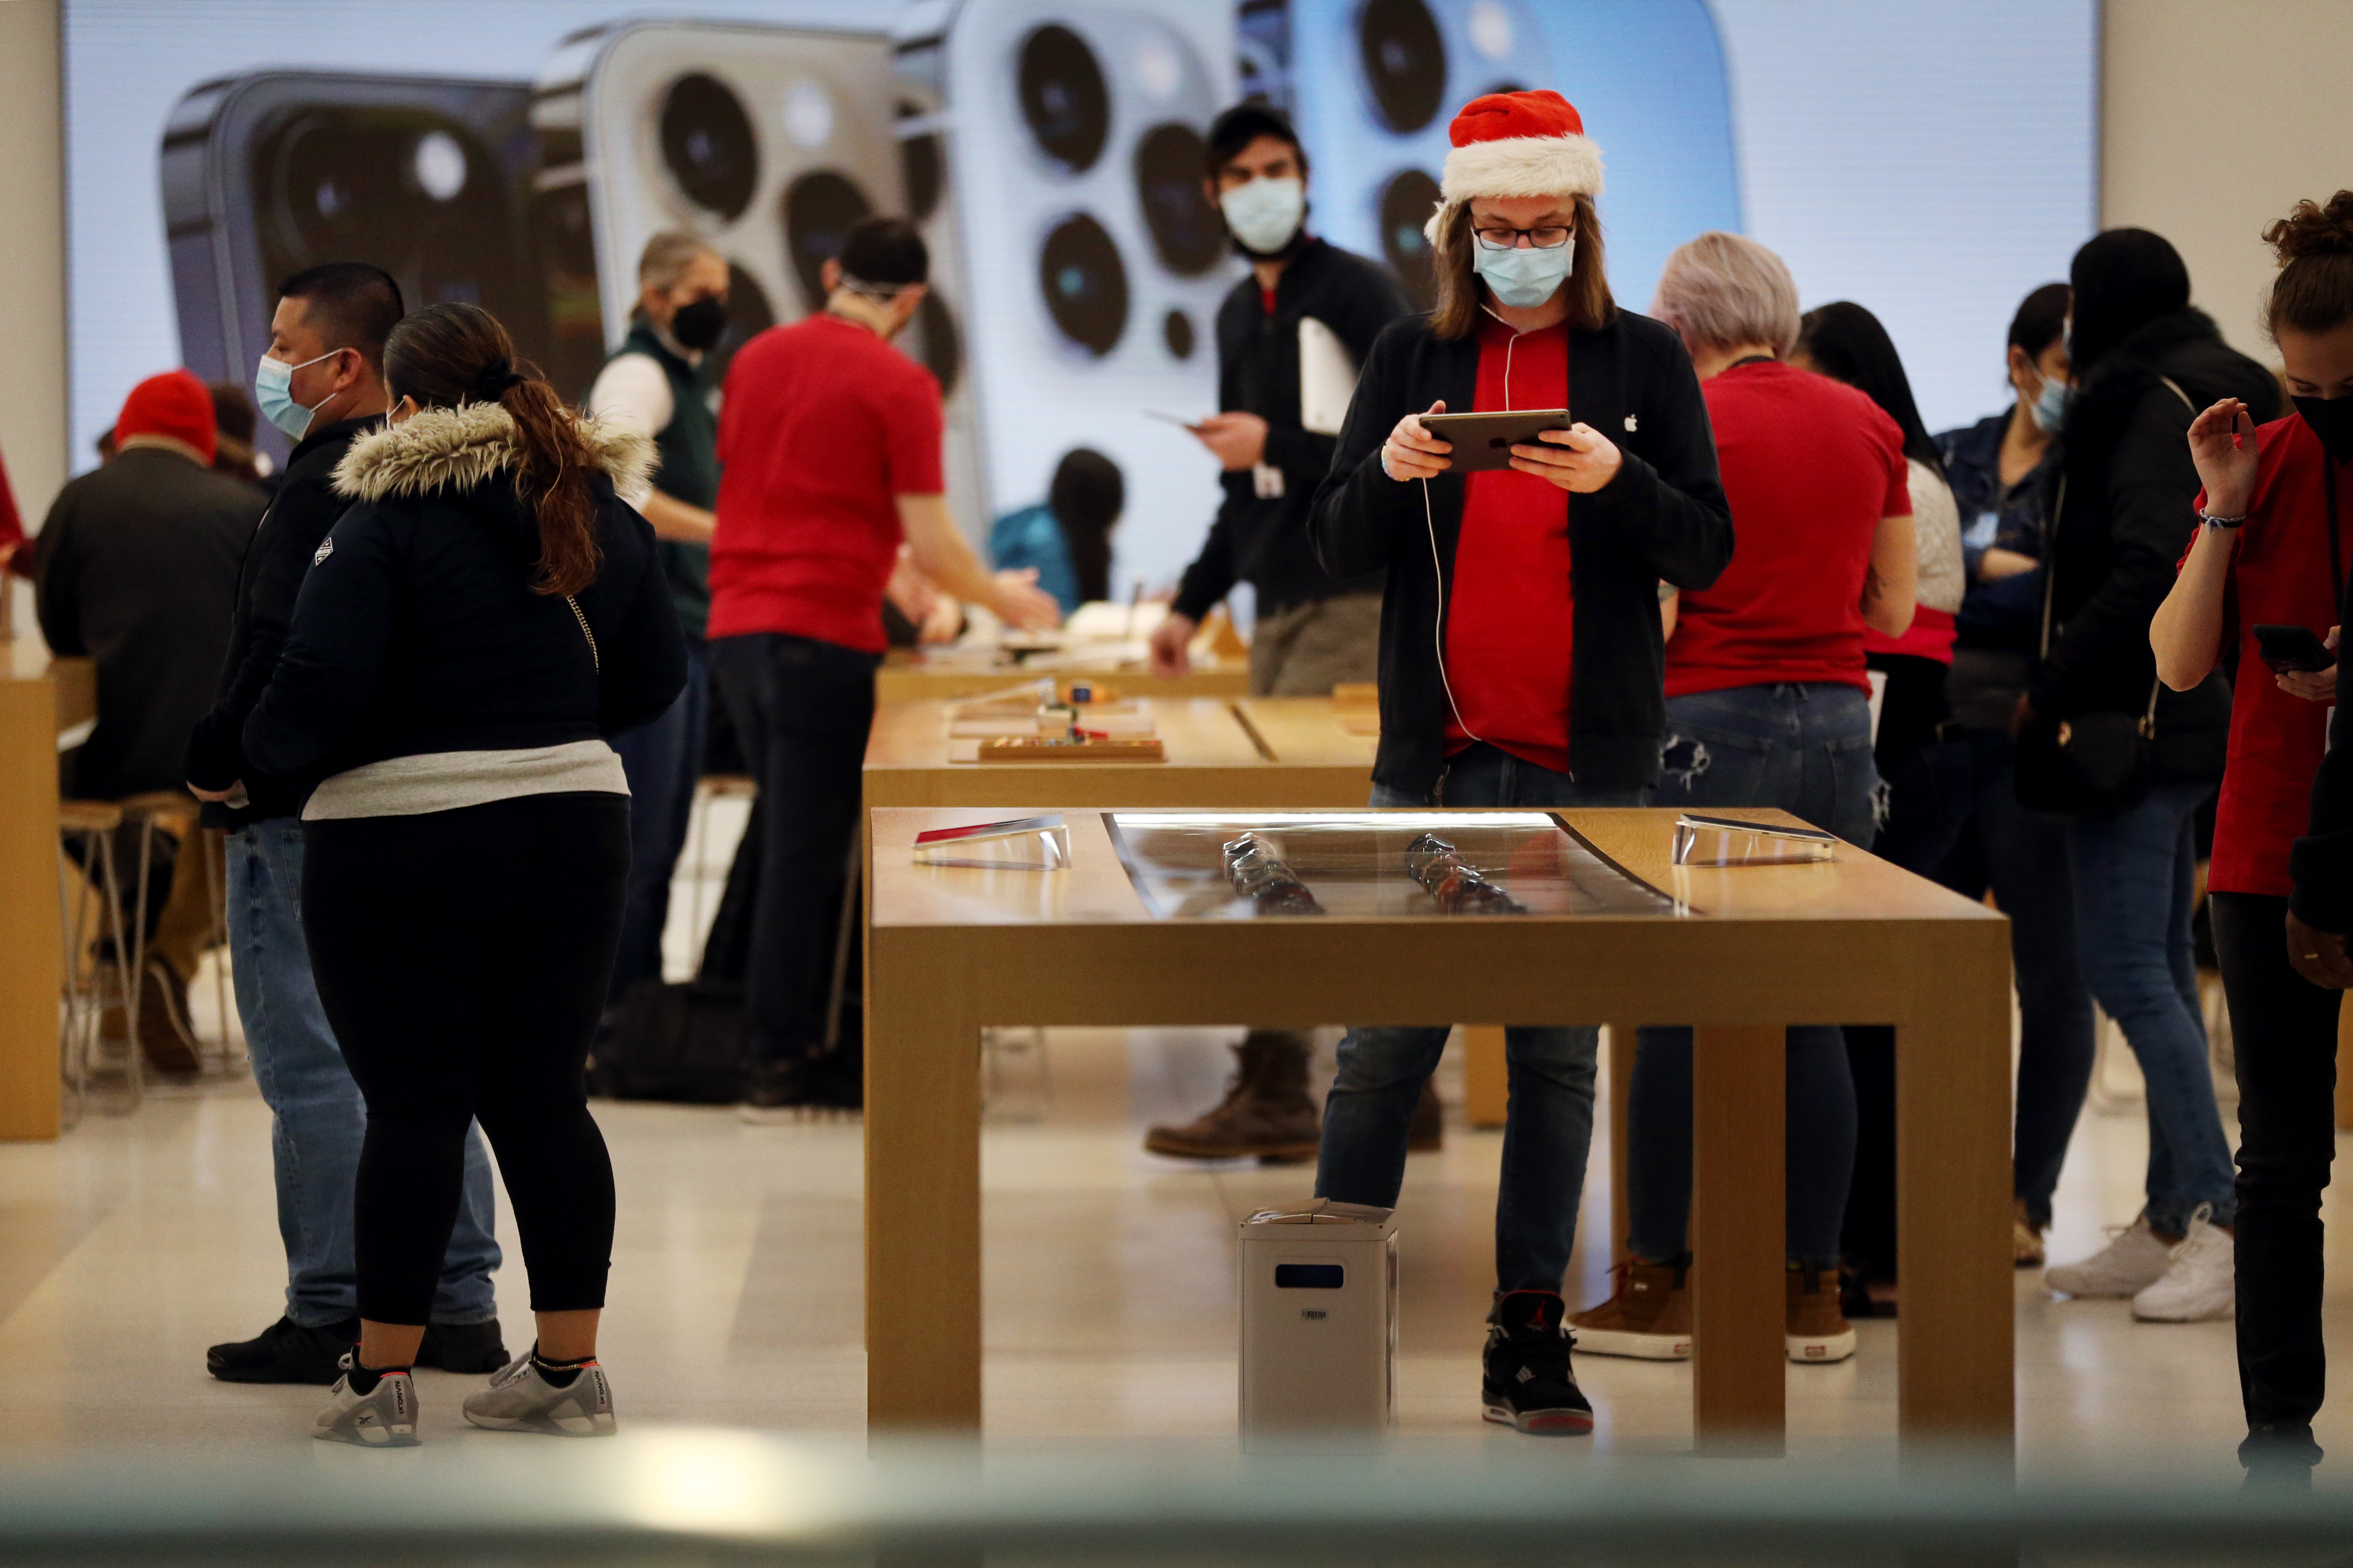 The Apple store during Black Friday shopping at CambridgeSide.